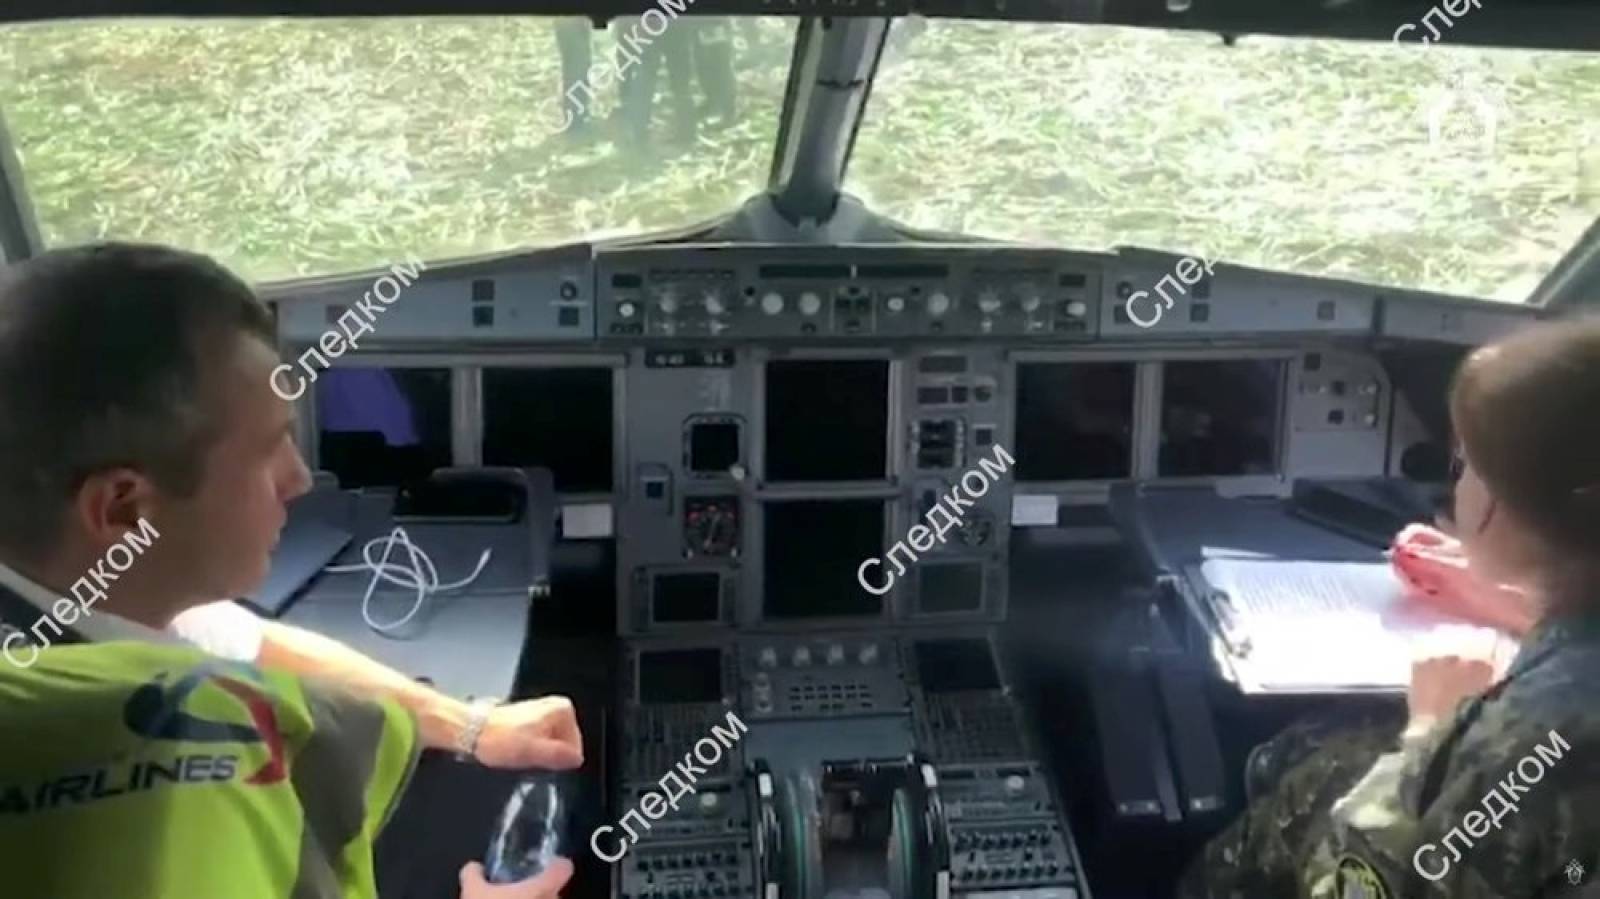 A still image shows investigators working inside the cockpit of a passenger plane following an emergency landing near Moscow